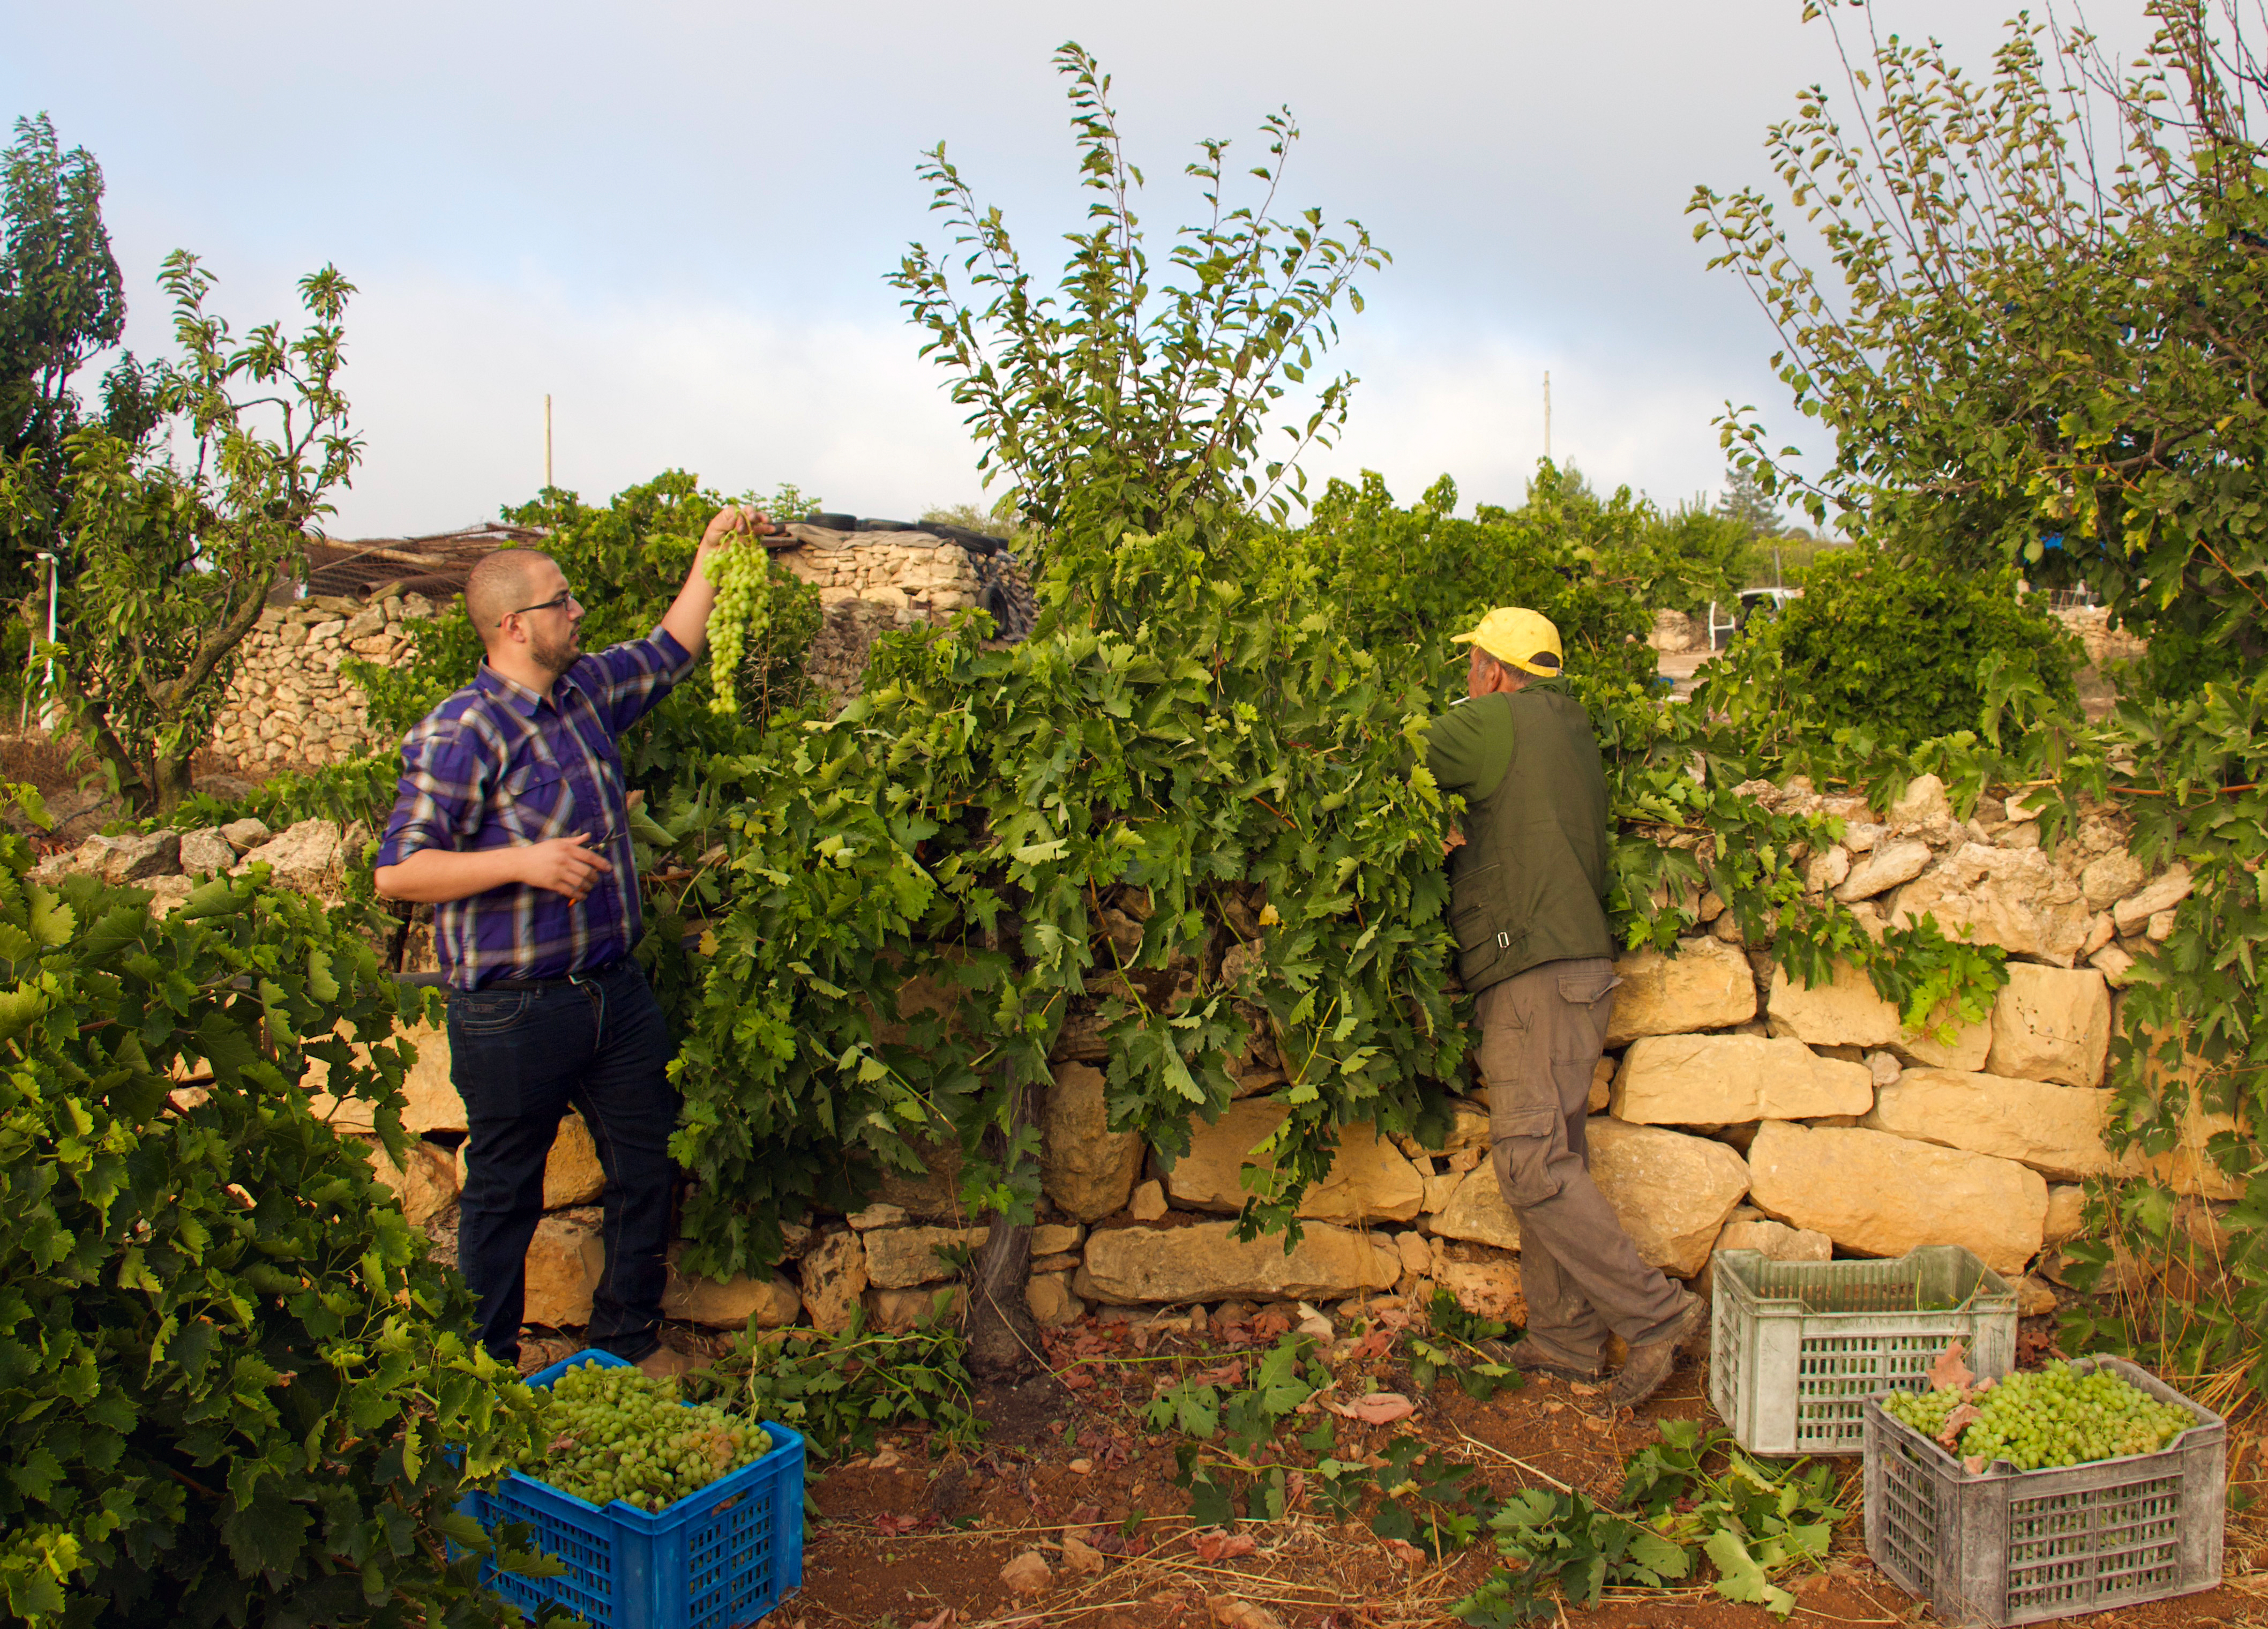 Two men pick grapes from large vine clusters on a low brick wall.